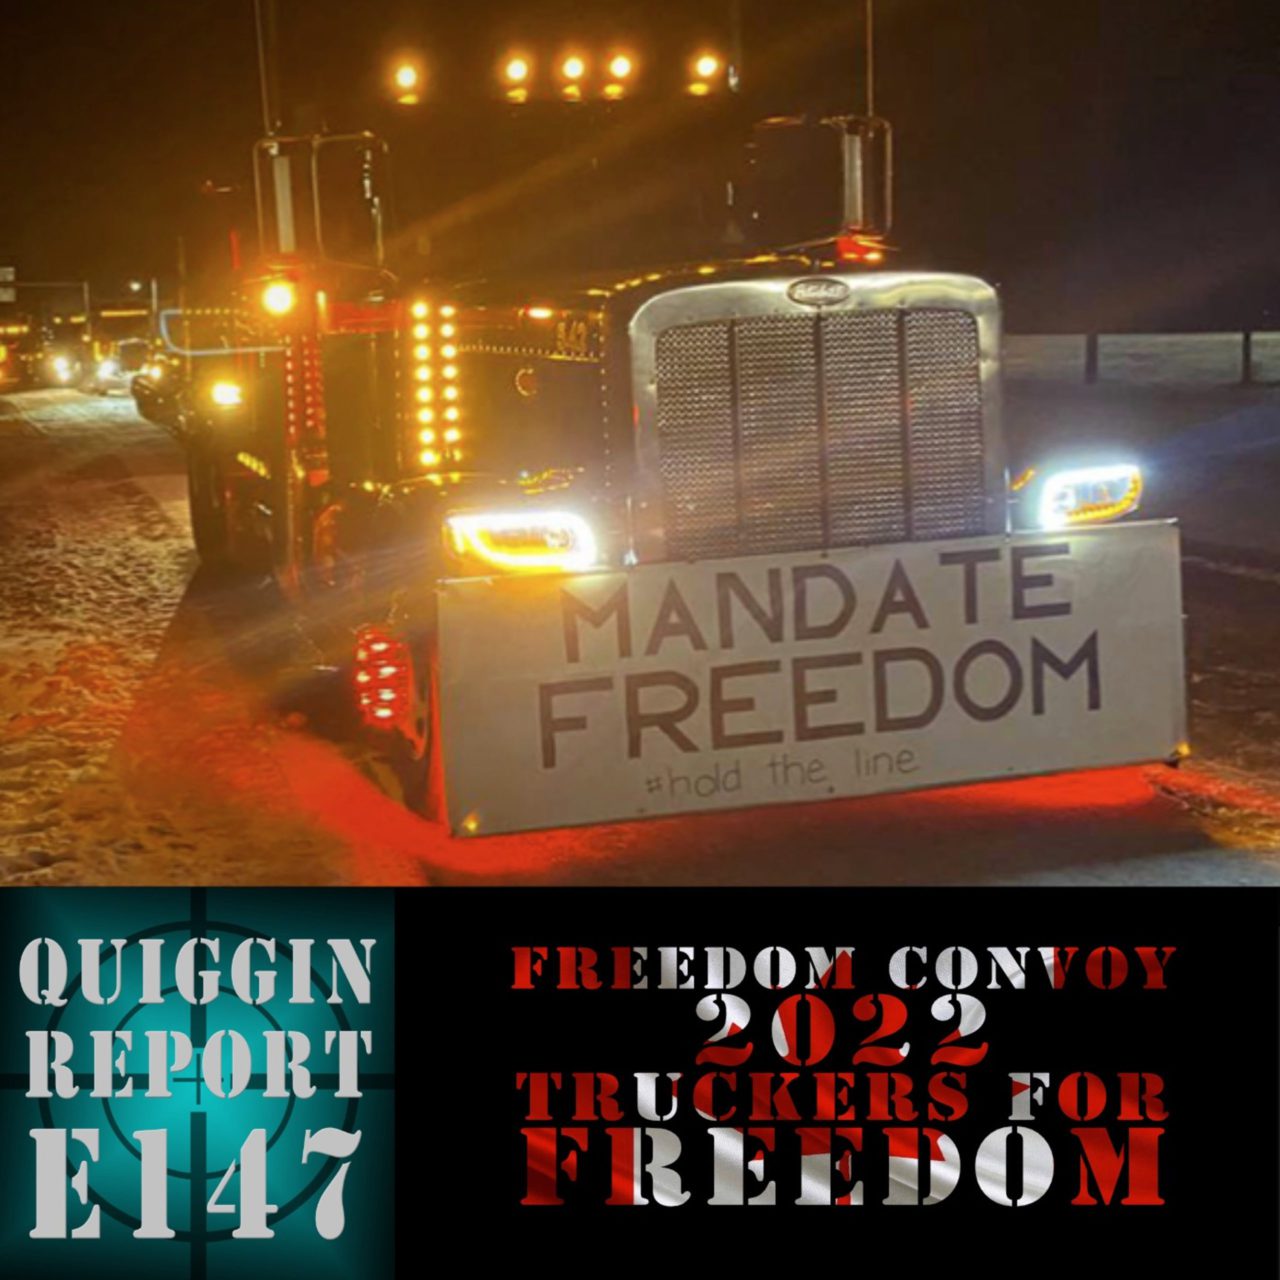 Truckers for freedom – with Tom Quiggin